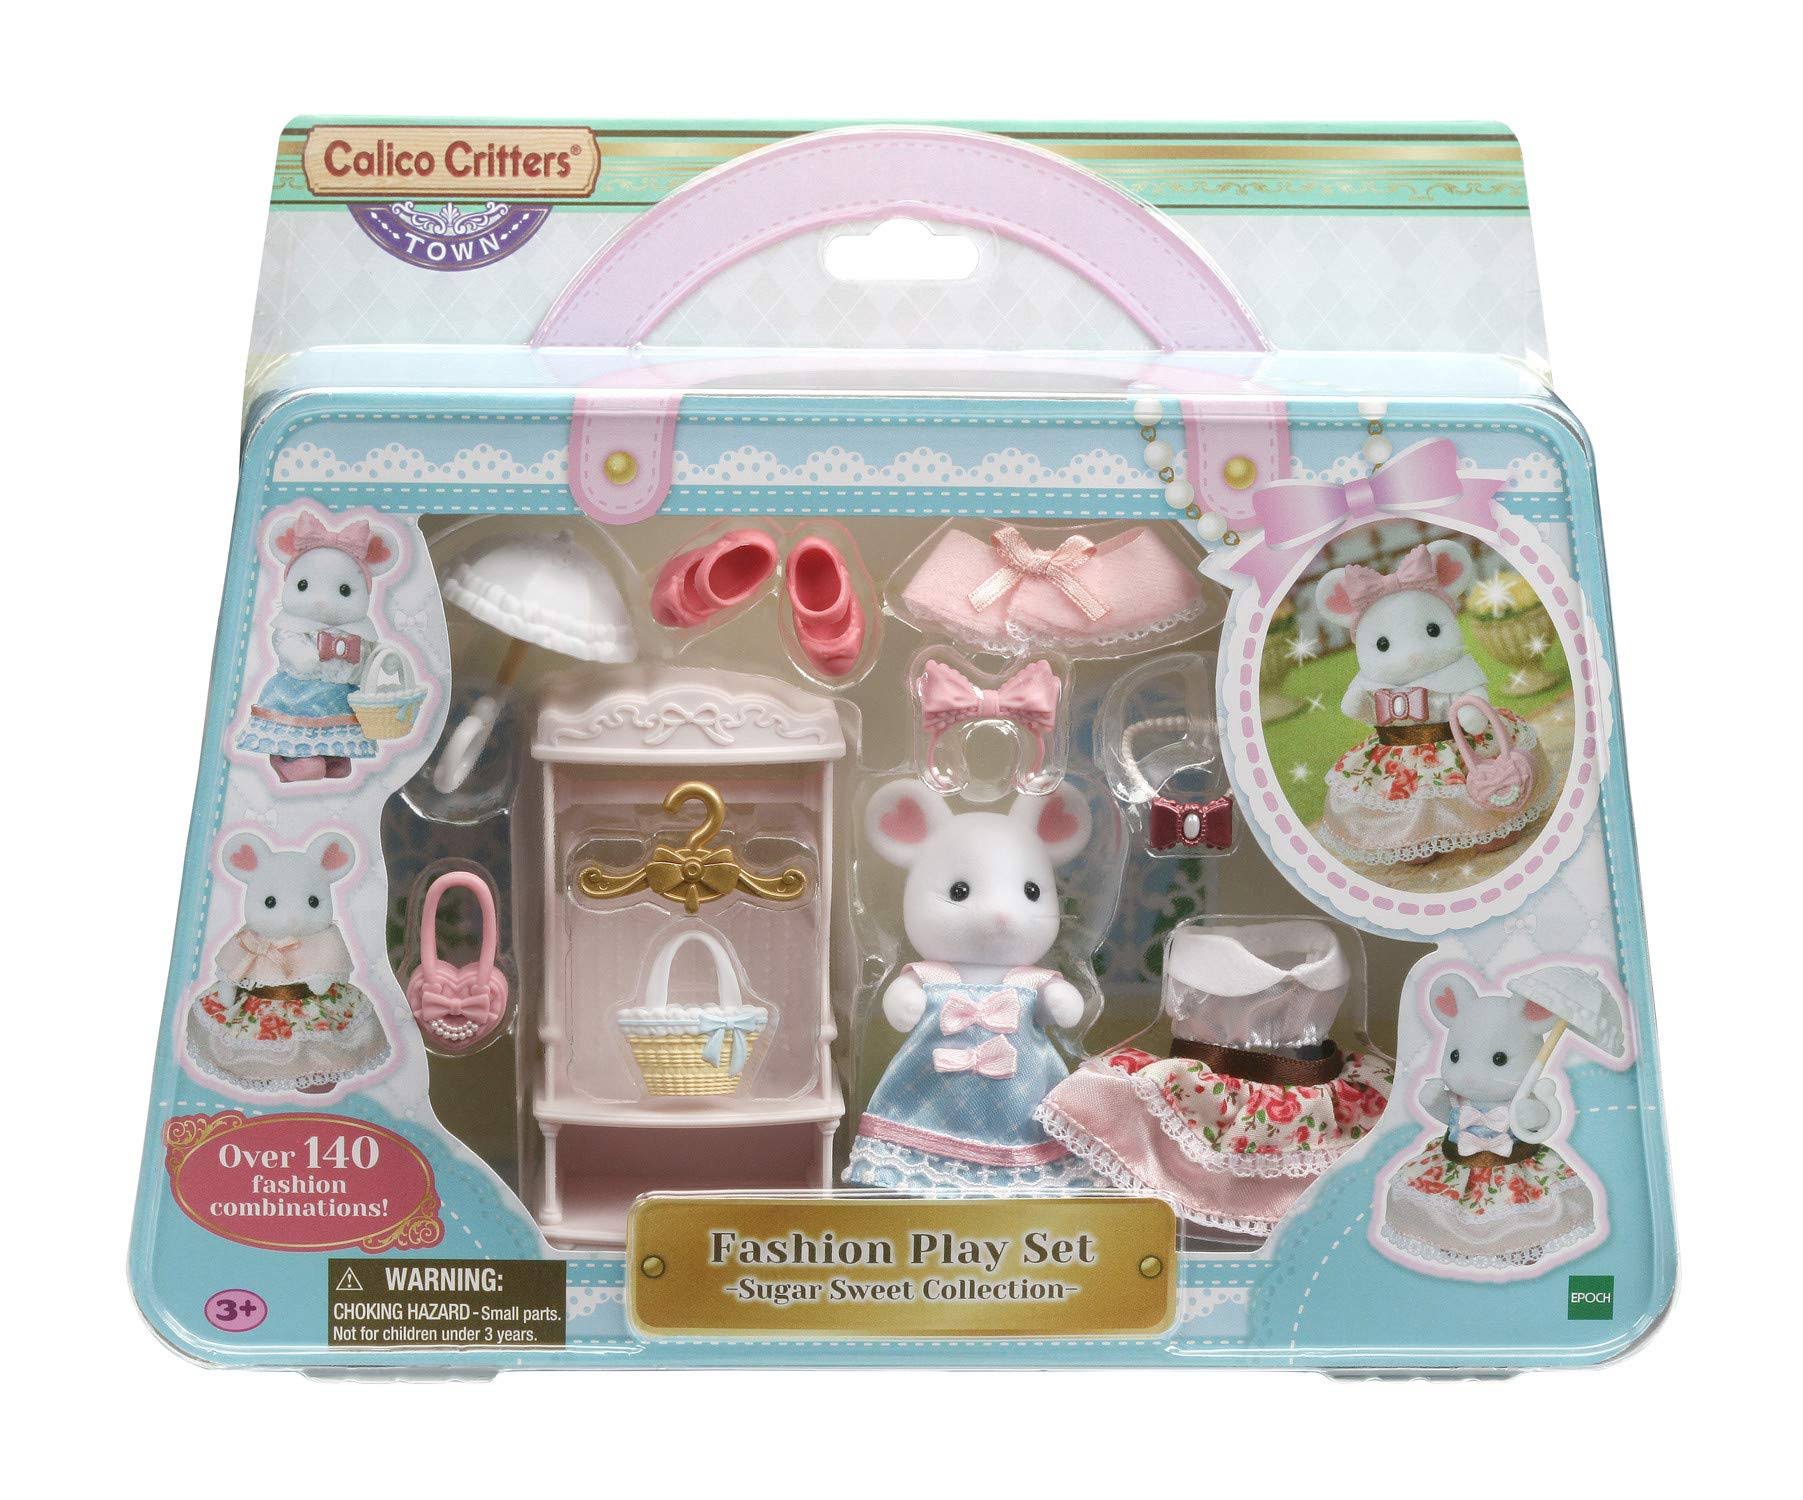 Calico Critters Fashion Playset